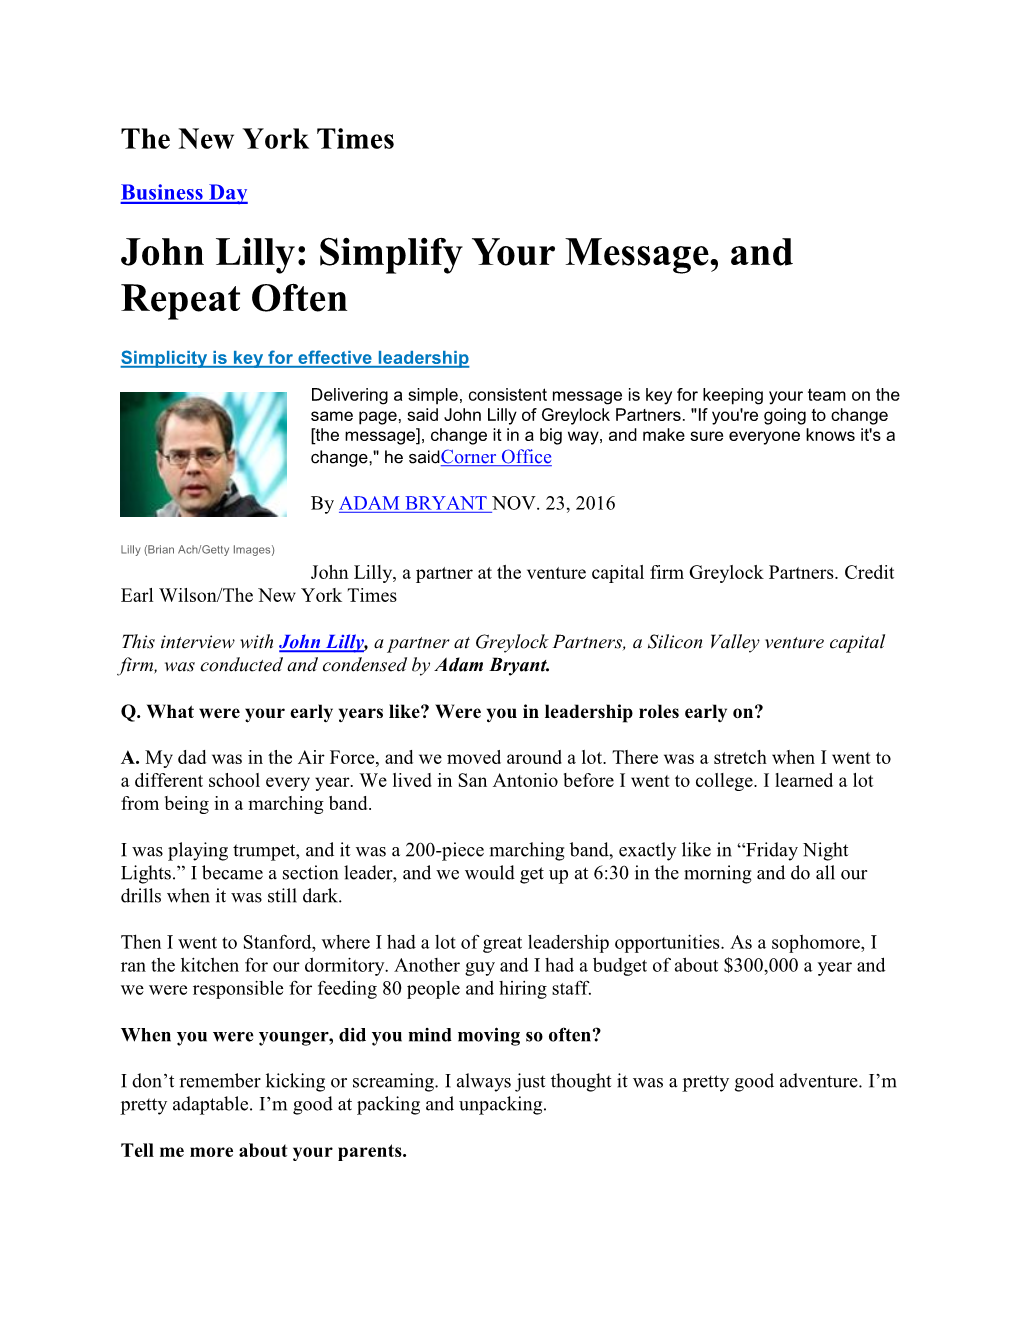 John Lilly: Simplify Your Message, and Repeat Often